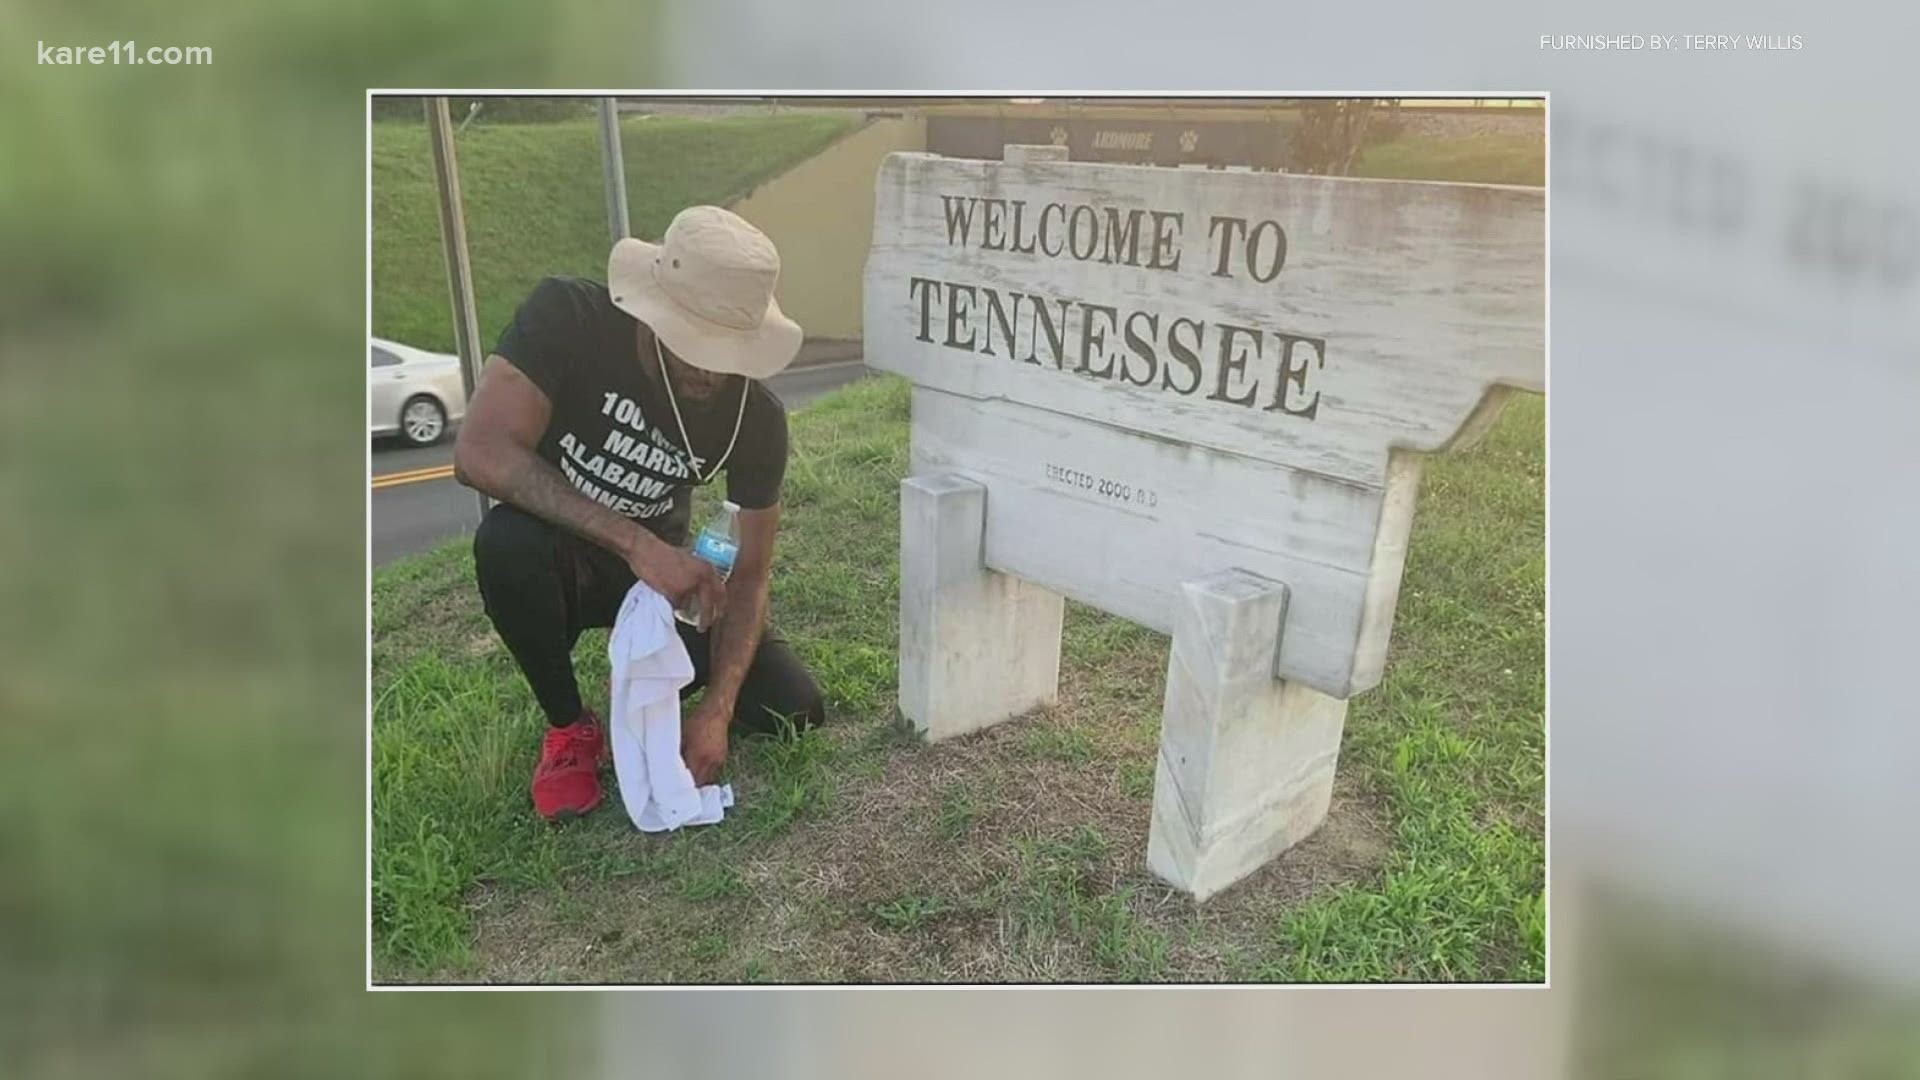 Terry Willis is walking from his home state of Alabama to Minneapolis in the wake of George Floyd's death, trying to spread a message of change.